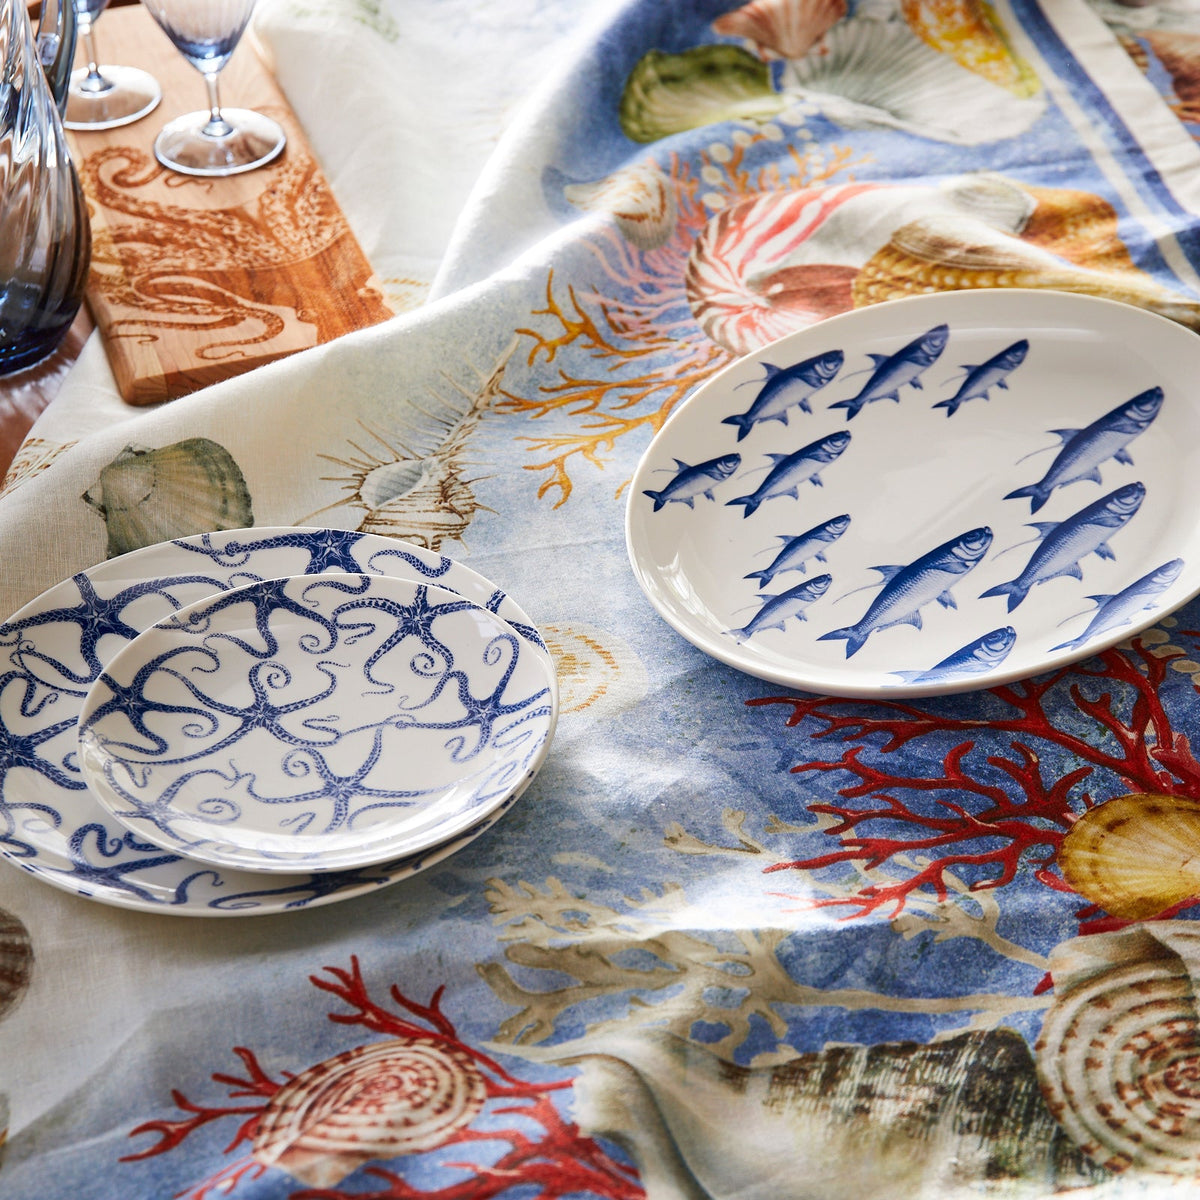 A tabletop featuring a cloth with sea life designs, and a set of white premium porcelain plates with blue sea creatures—one with fish and one with octopuses. Three wine glasses and a wooden board are partially visible, alongside a charming Starfish Coupe Salad Plate by Caskata Artisanal Home.